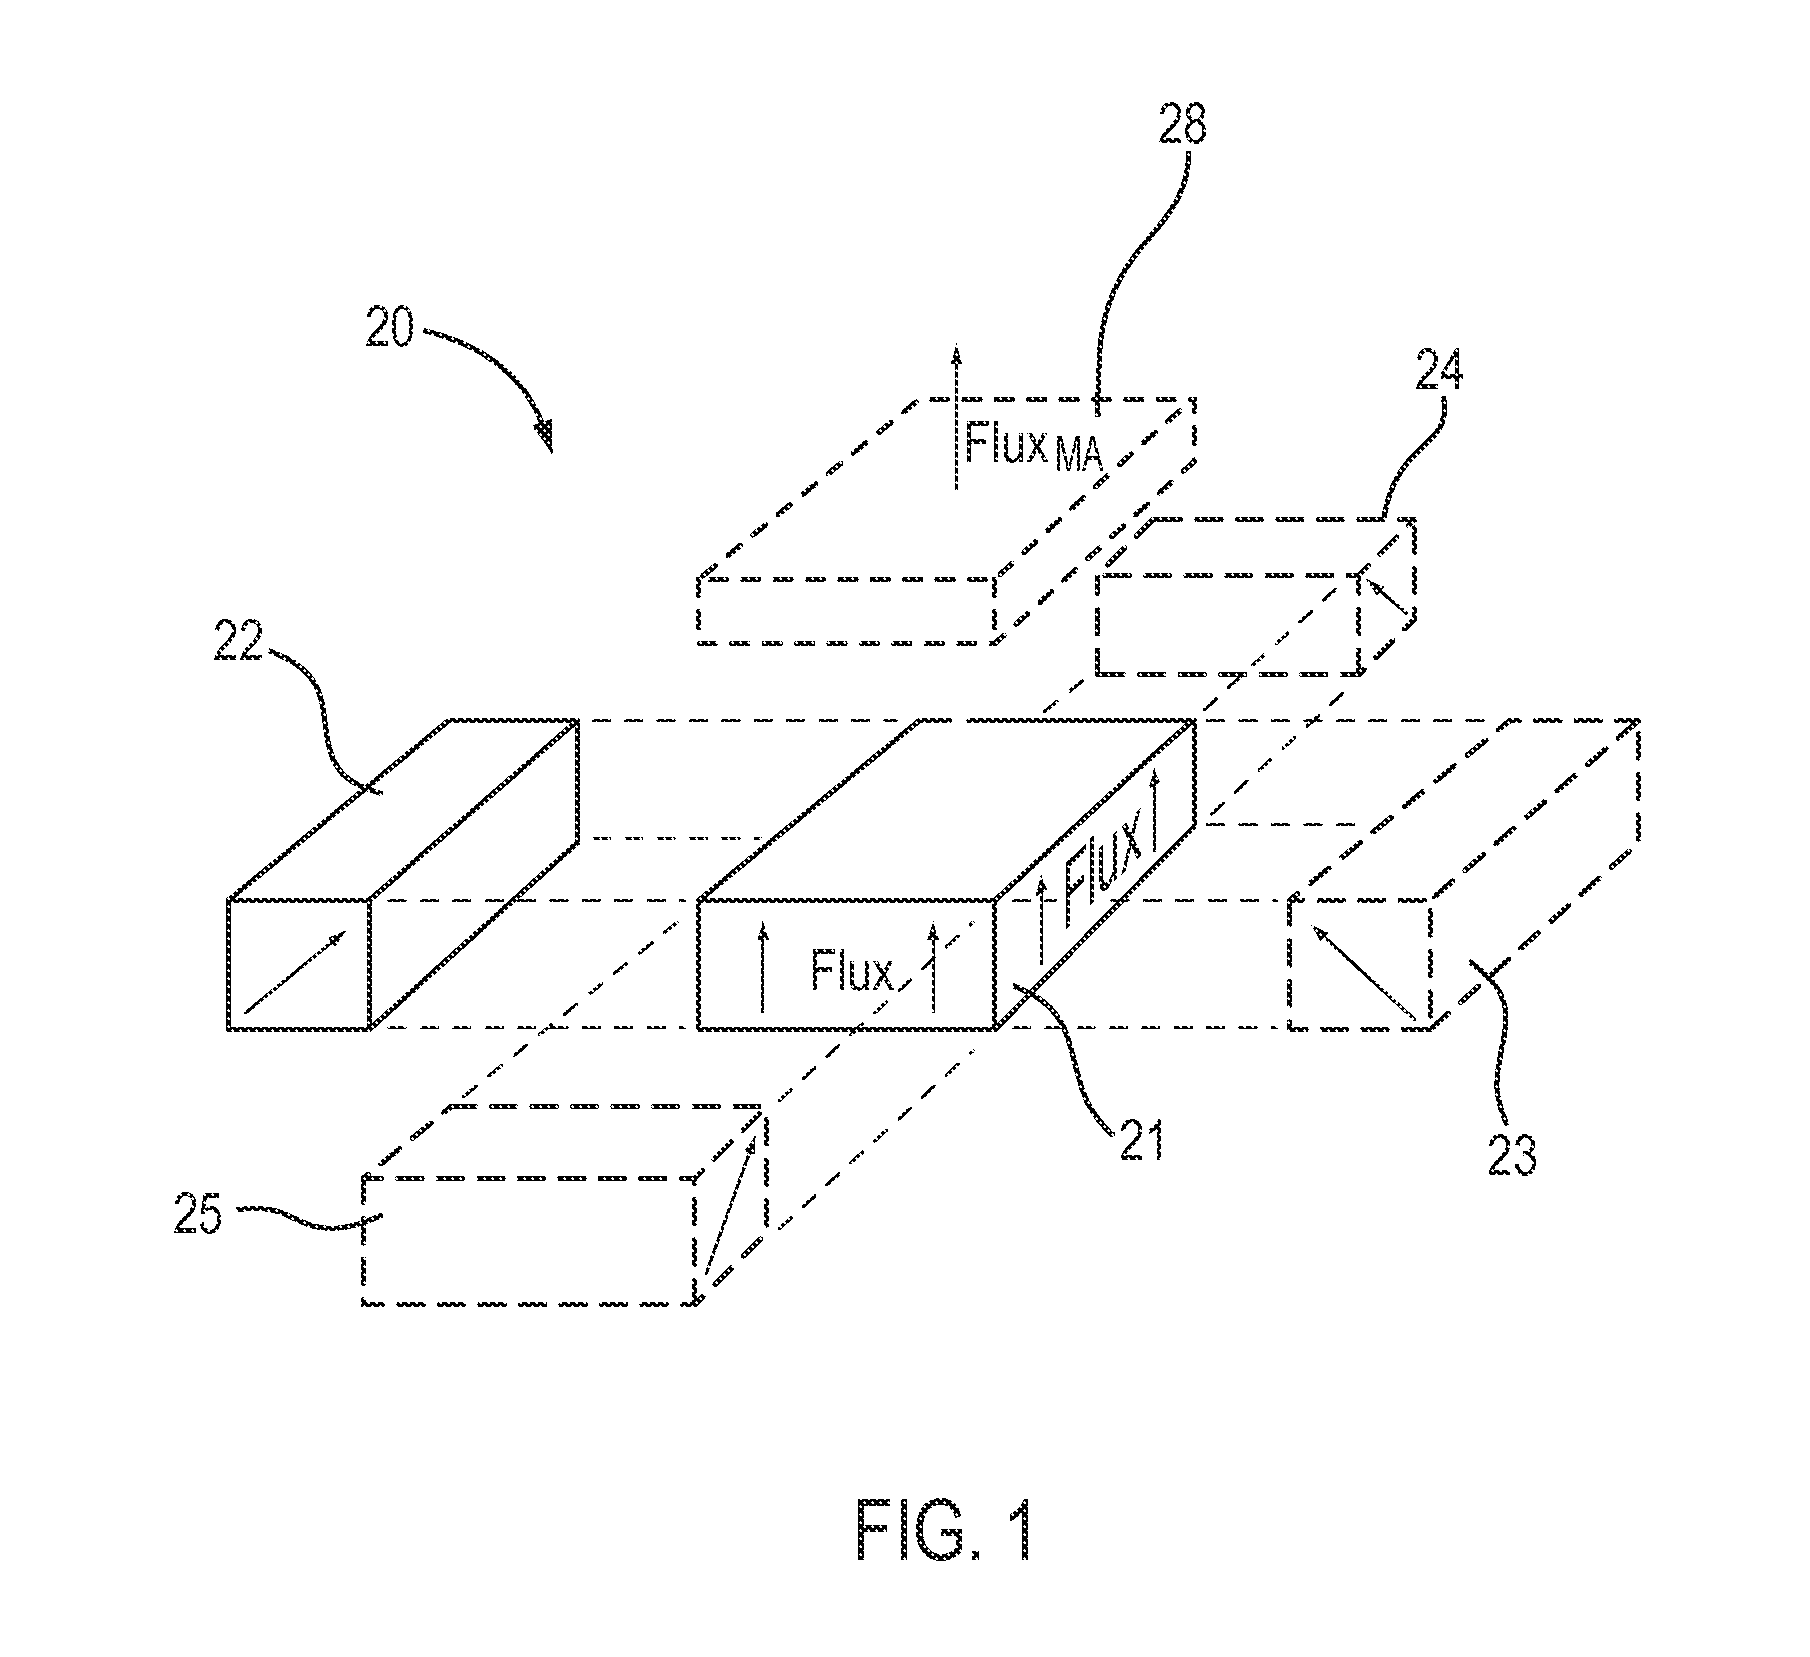 Flux focusing arrangement for permanent magnets, methods of fabricating such arrangements, and machines including such arrangements